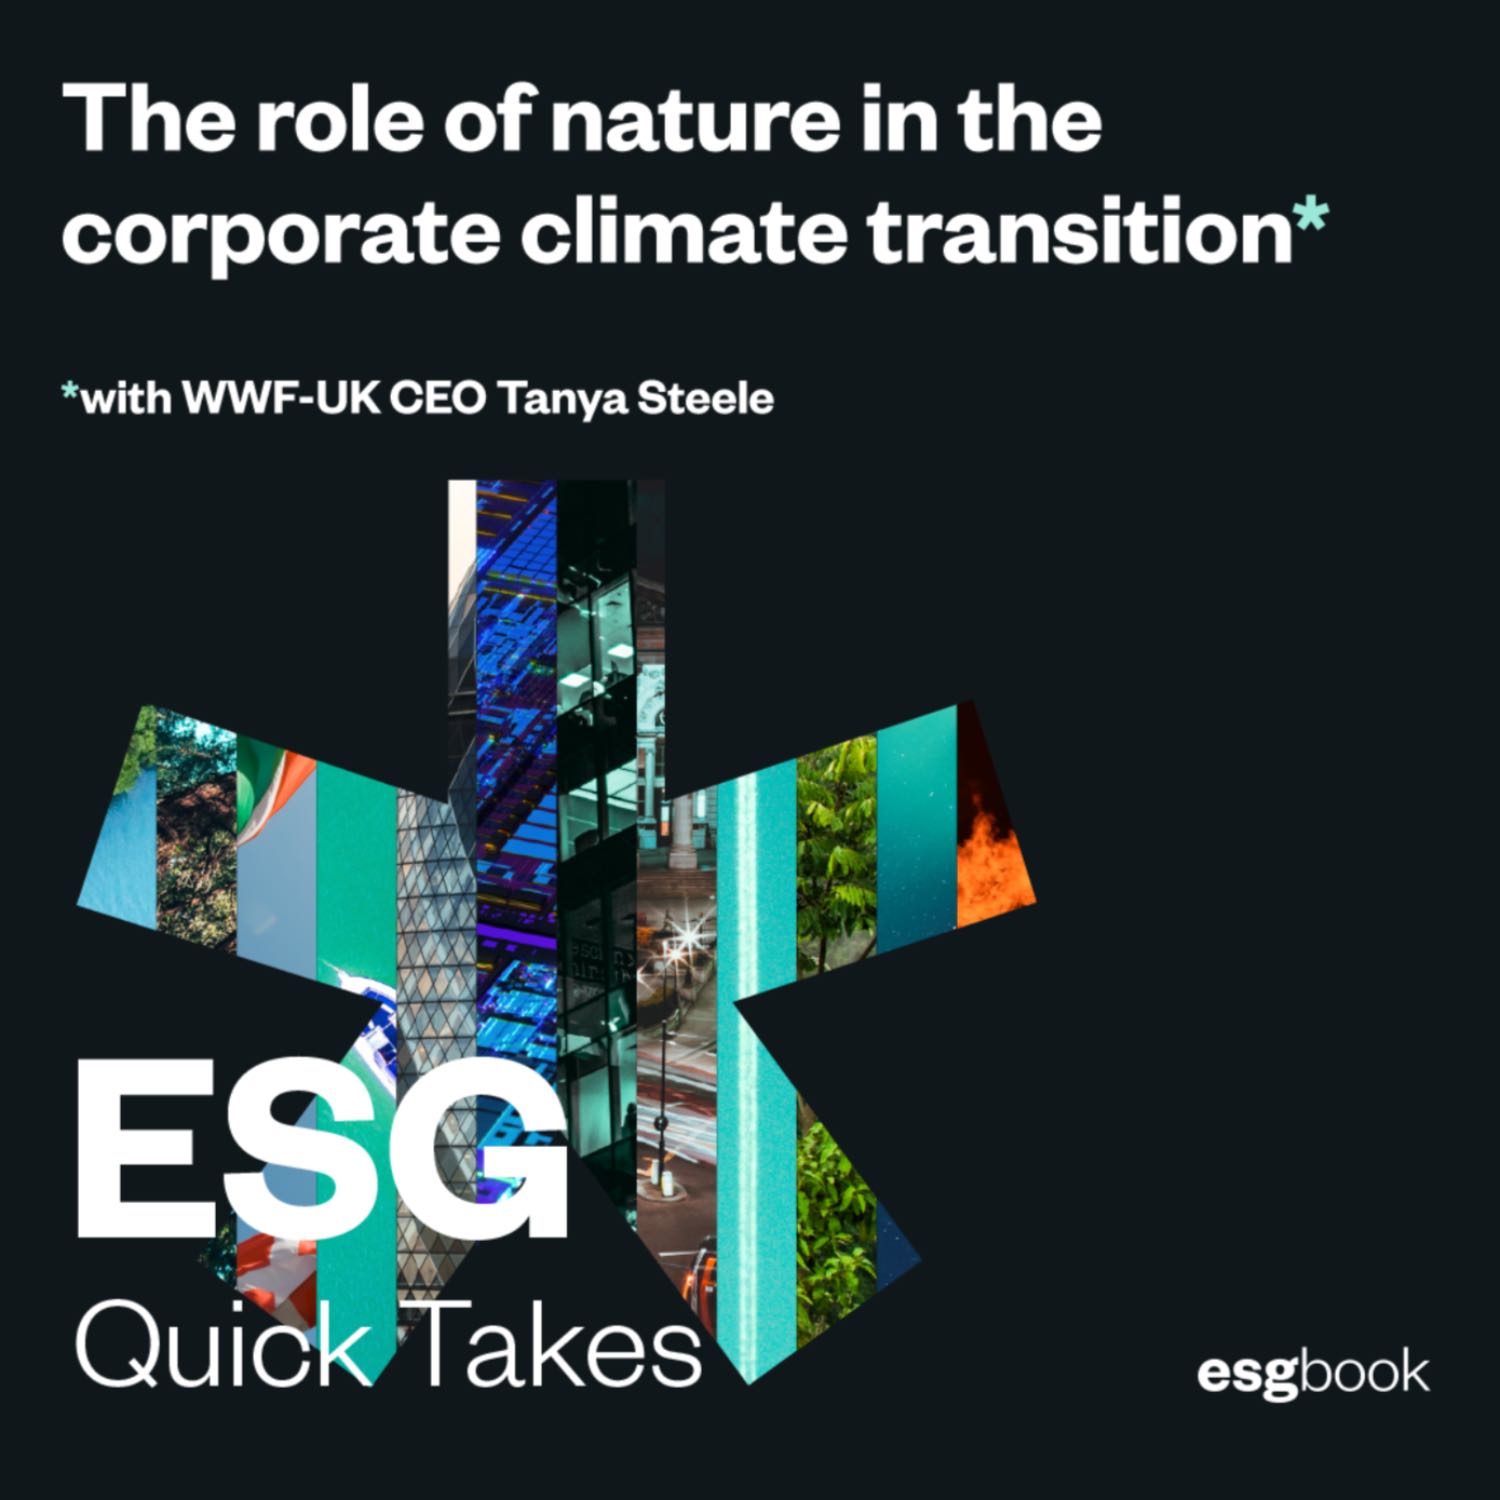 The role of nature in the corporate climate transition: with WWF-UK CEO Tanya Steele